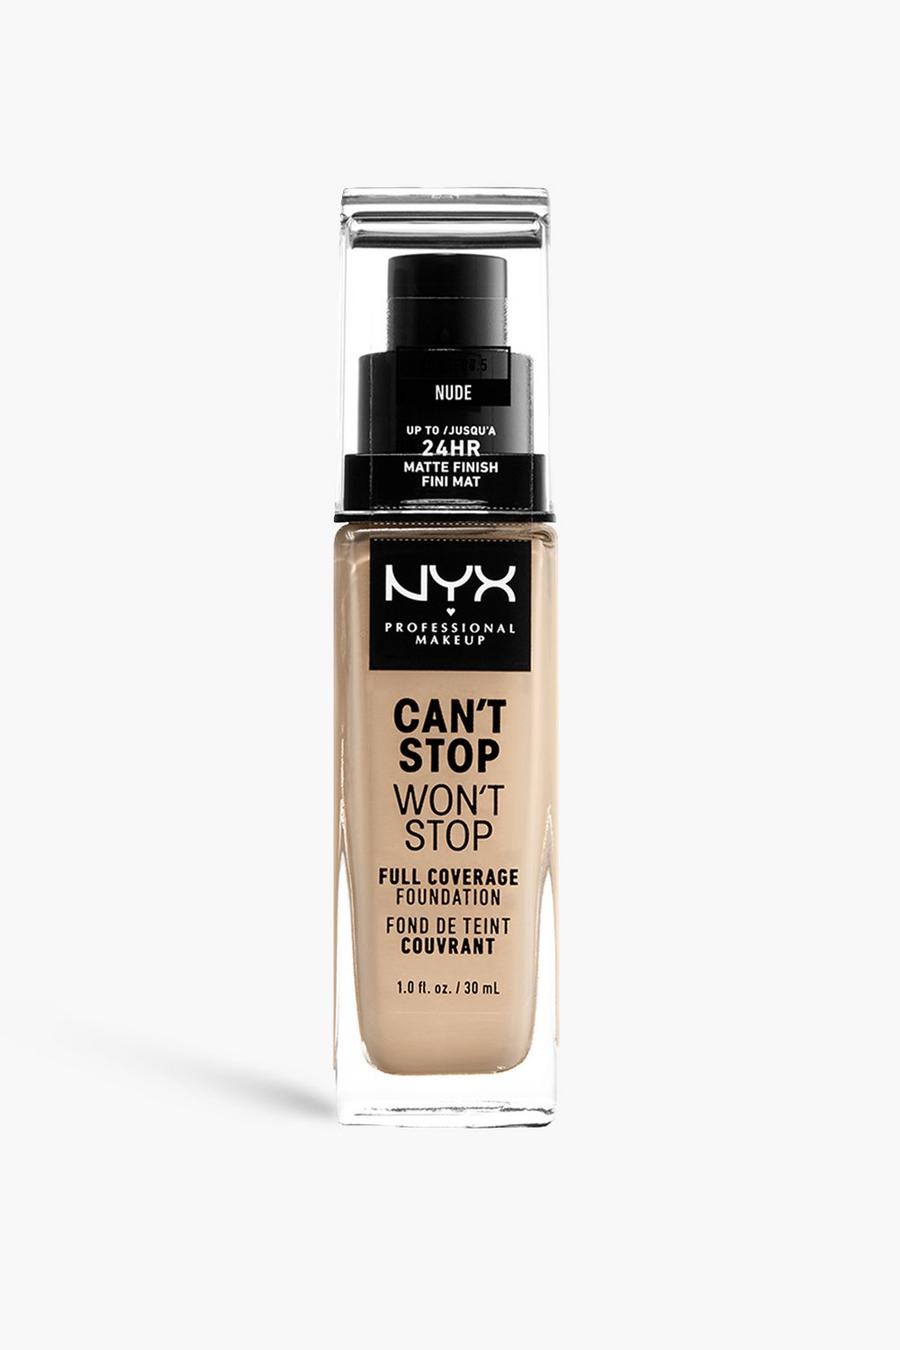 Nude NYX Professional Makeup Can't Stop Won't Stop Full Coverage Foundation 